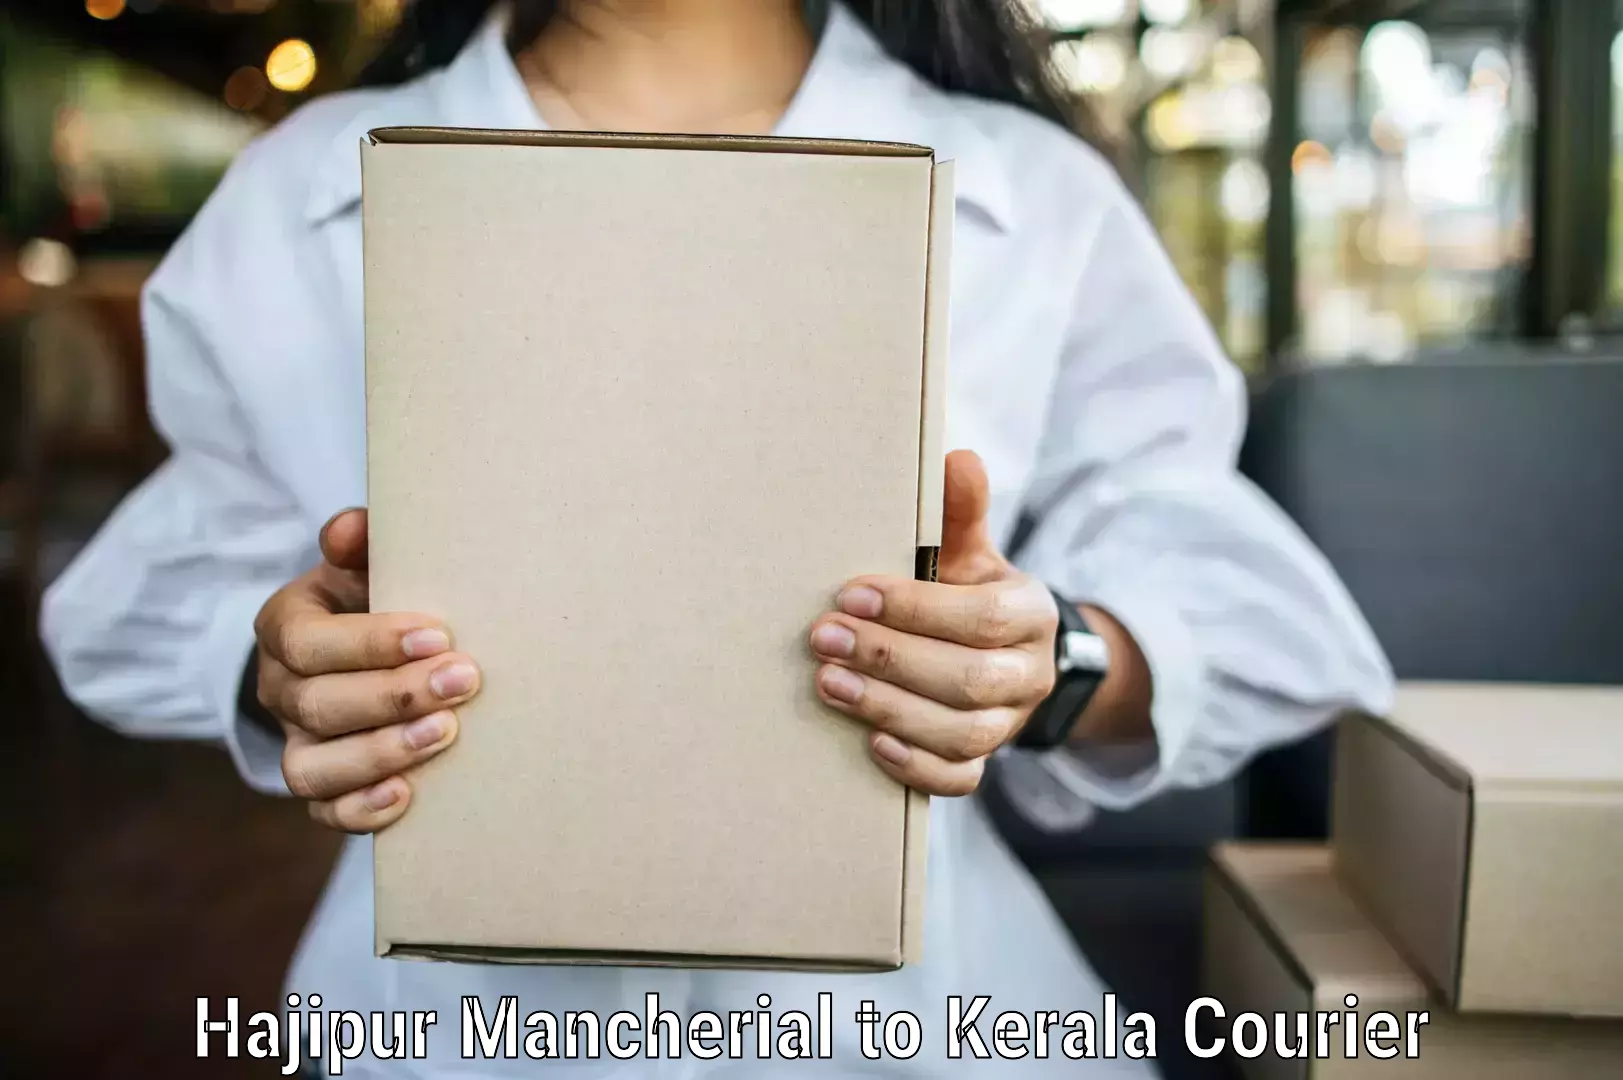 Special handling courier Hajipur Mancherial to Thamarassery